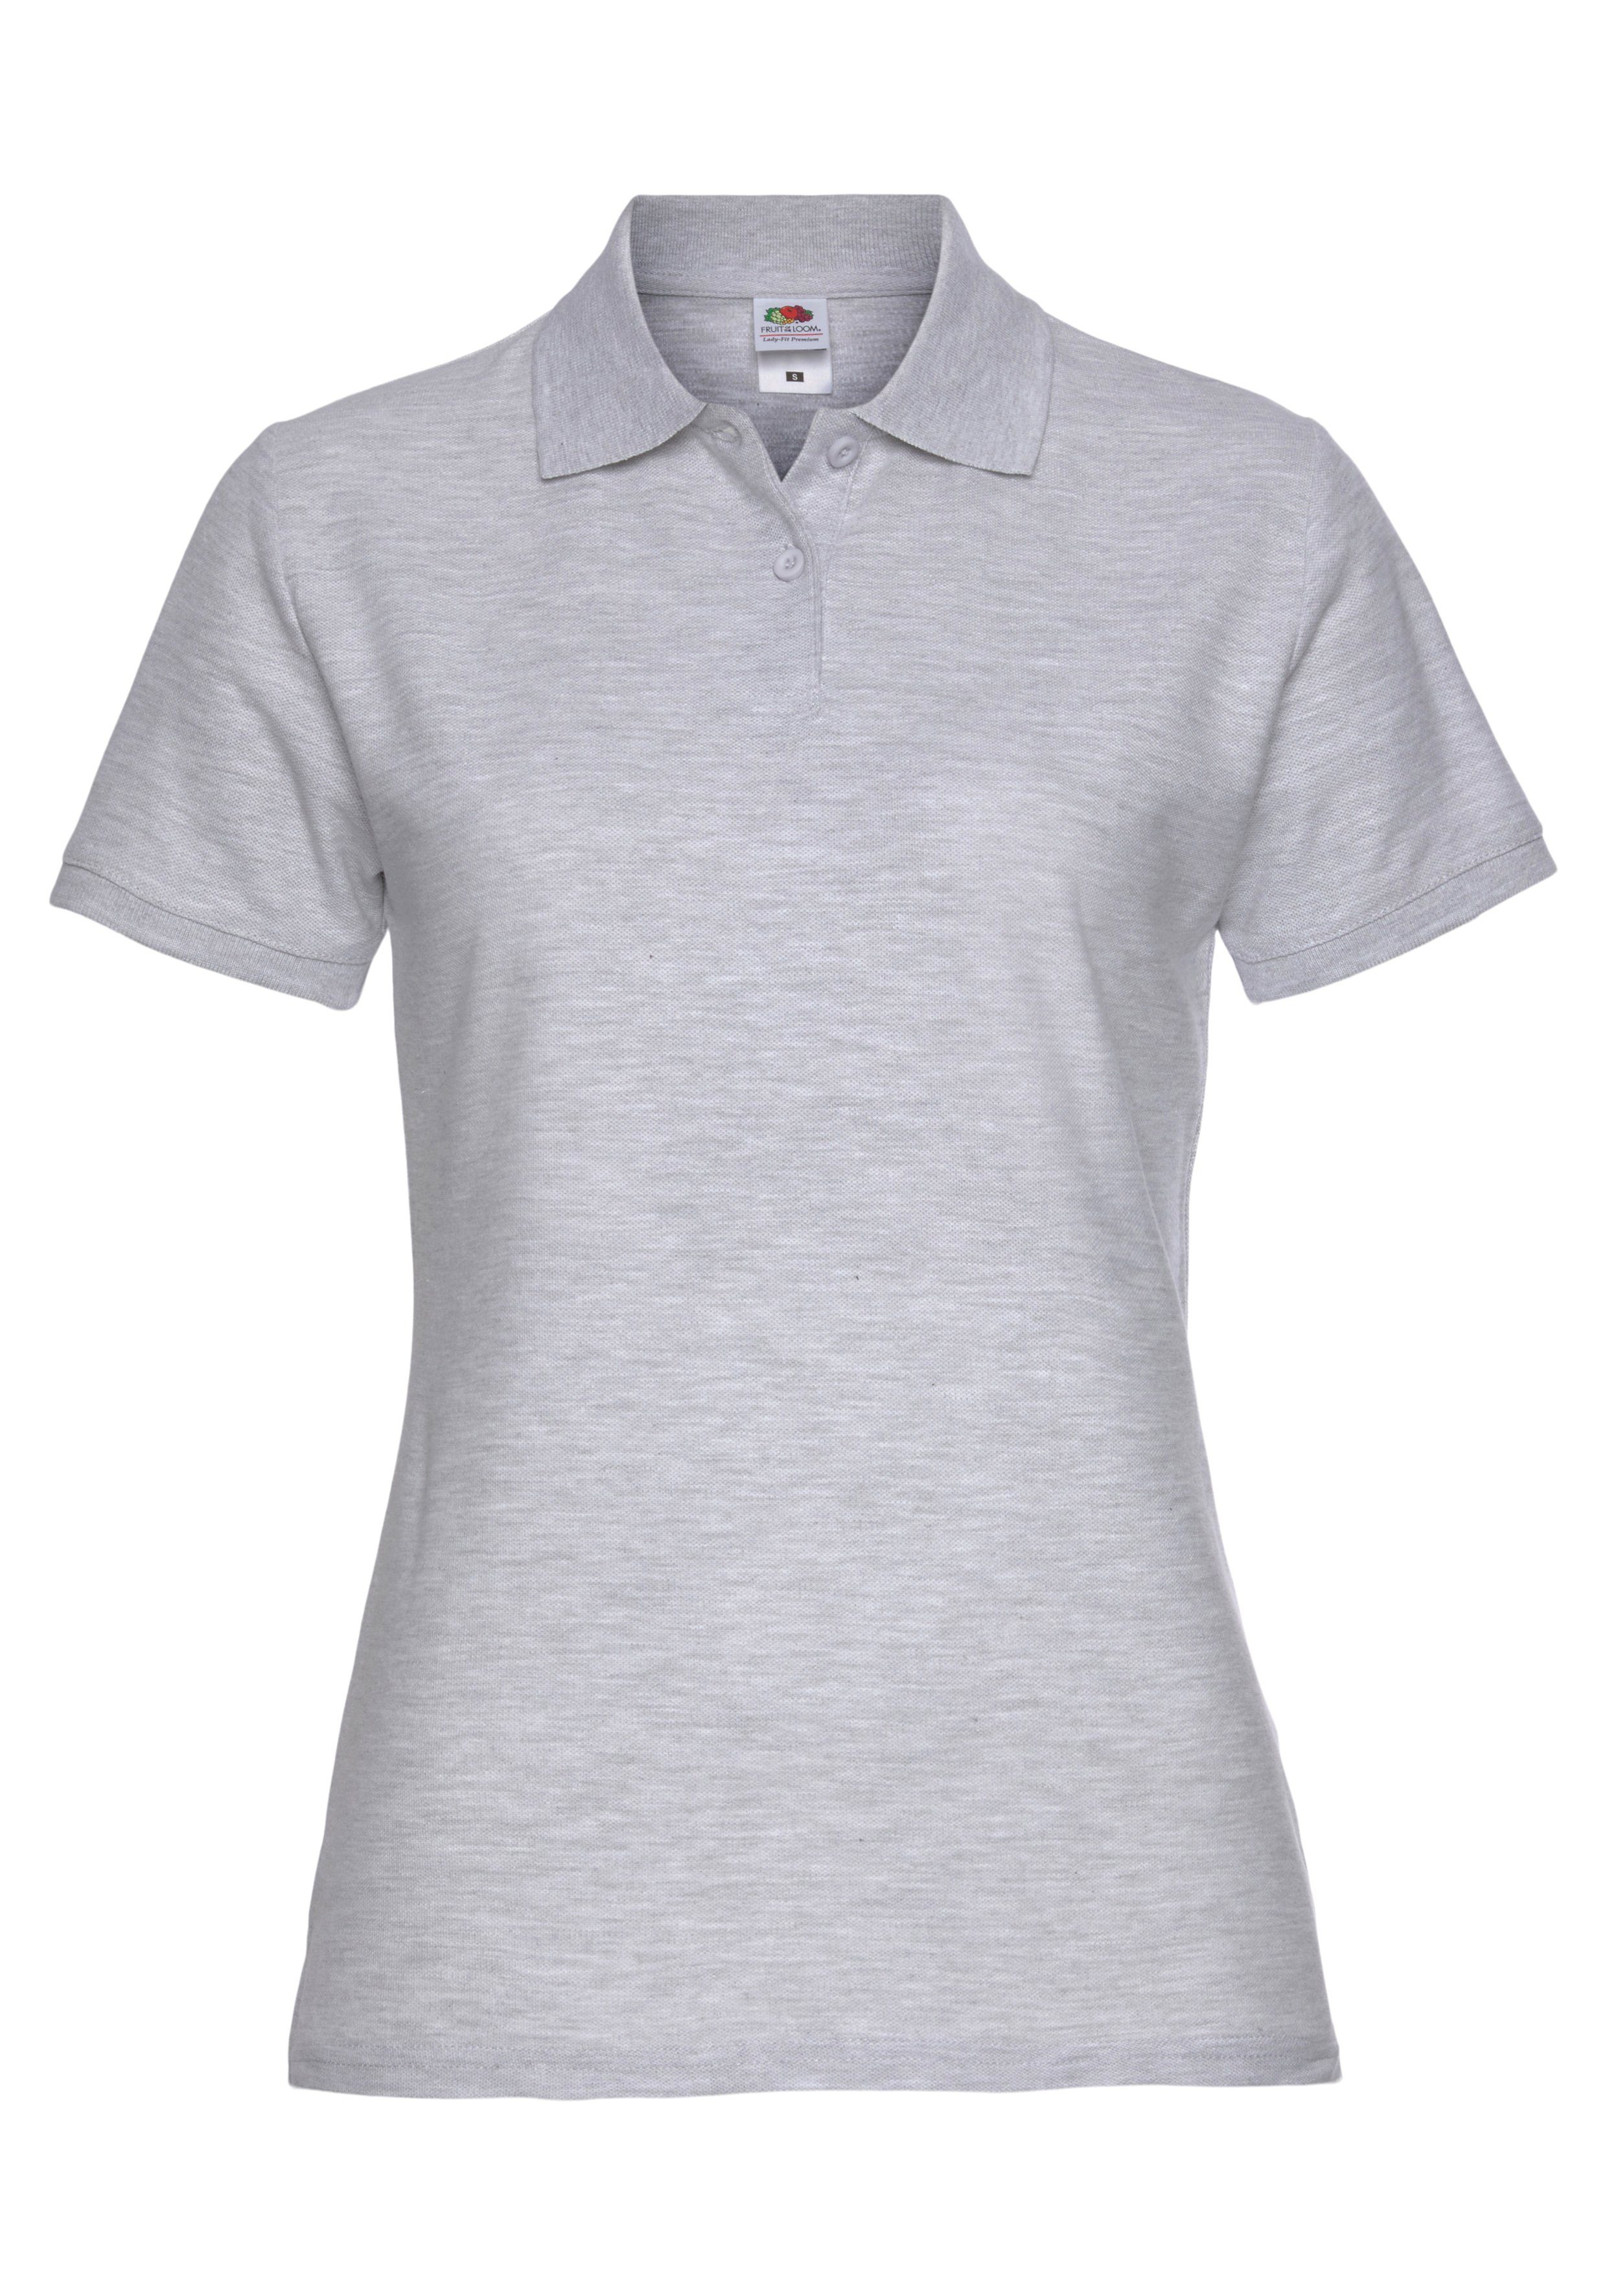 Fruit of the Loom Poloshirt Lady-Fit Premium Polo graumeliert